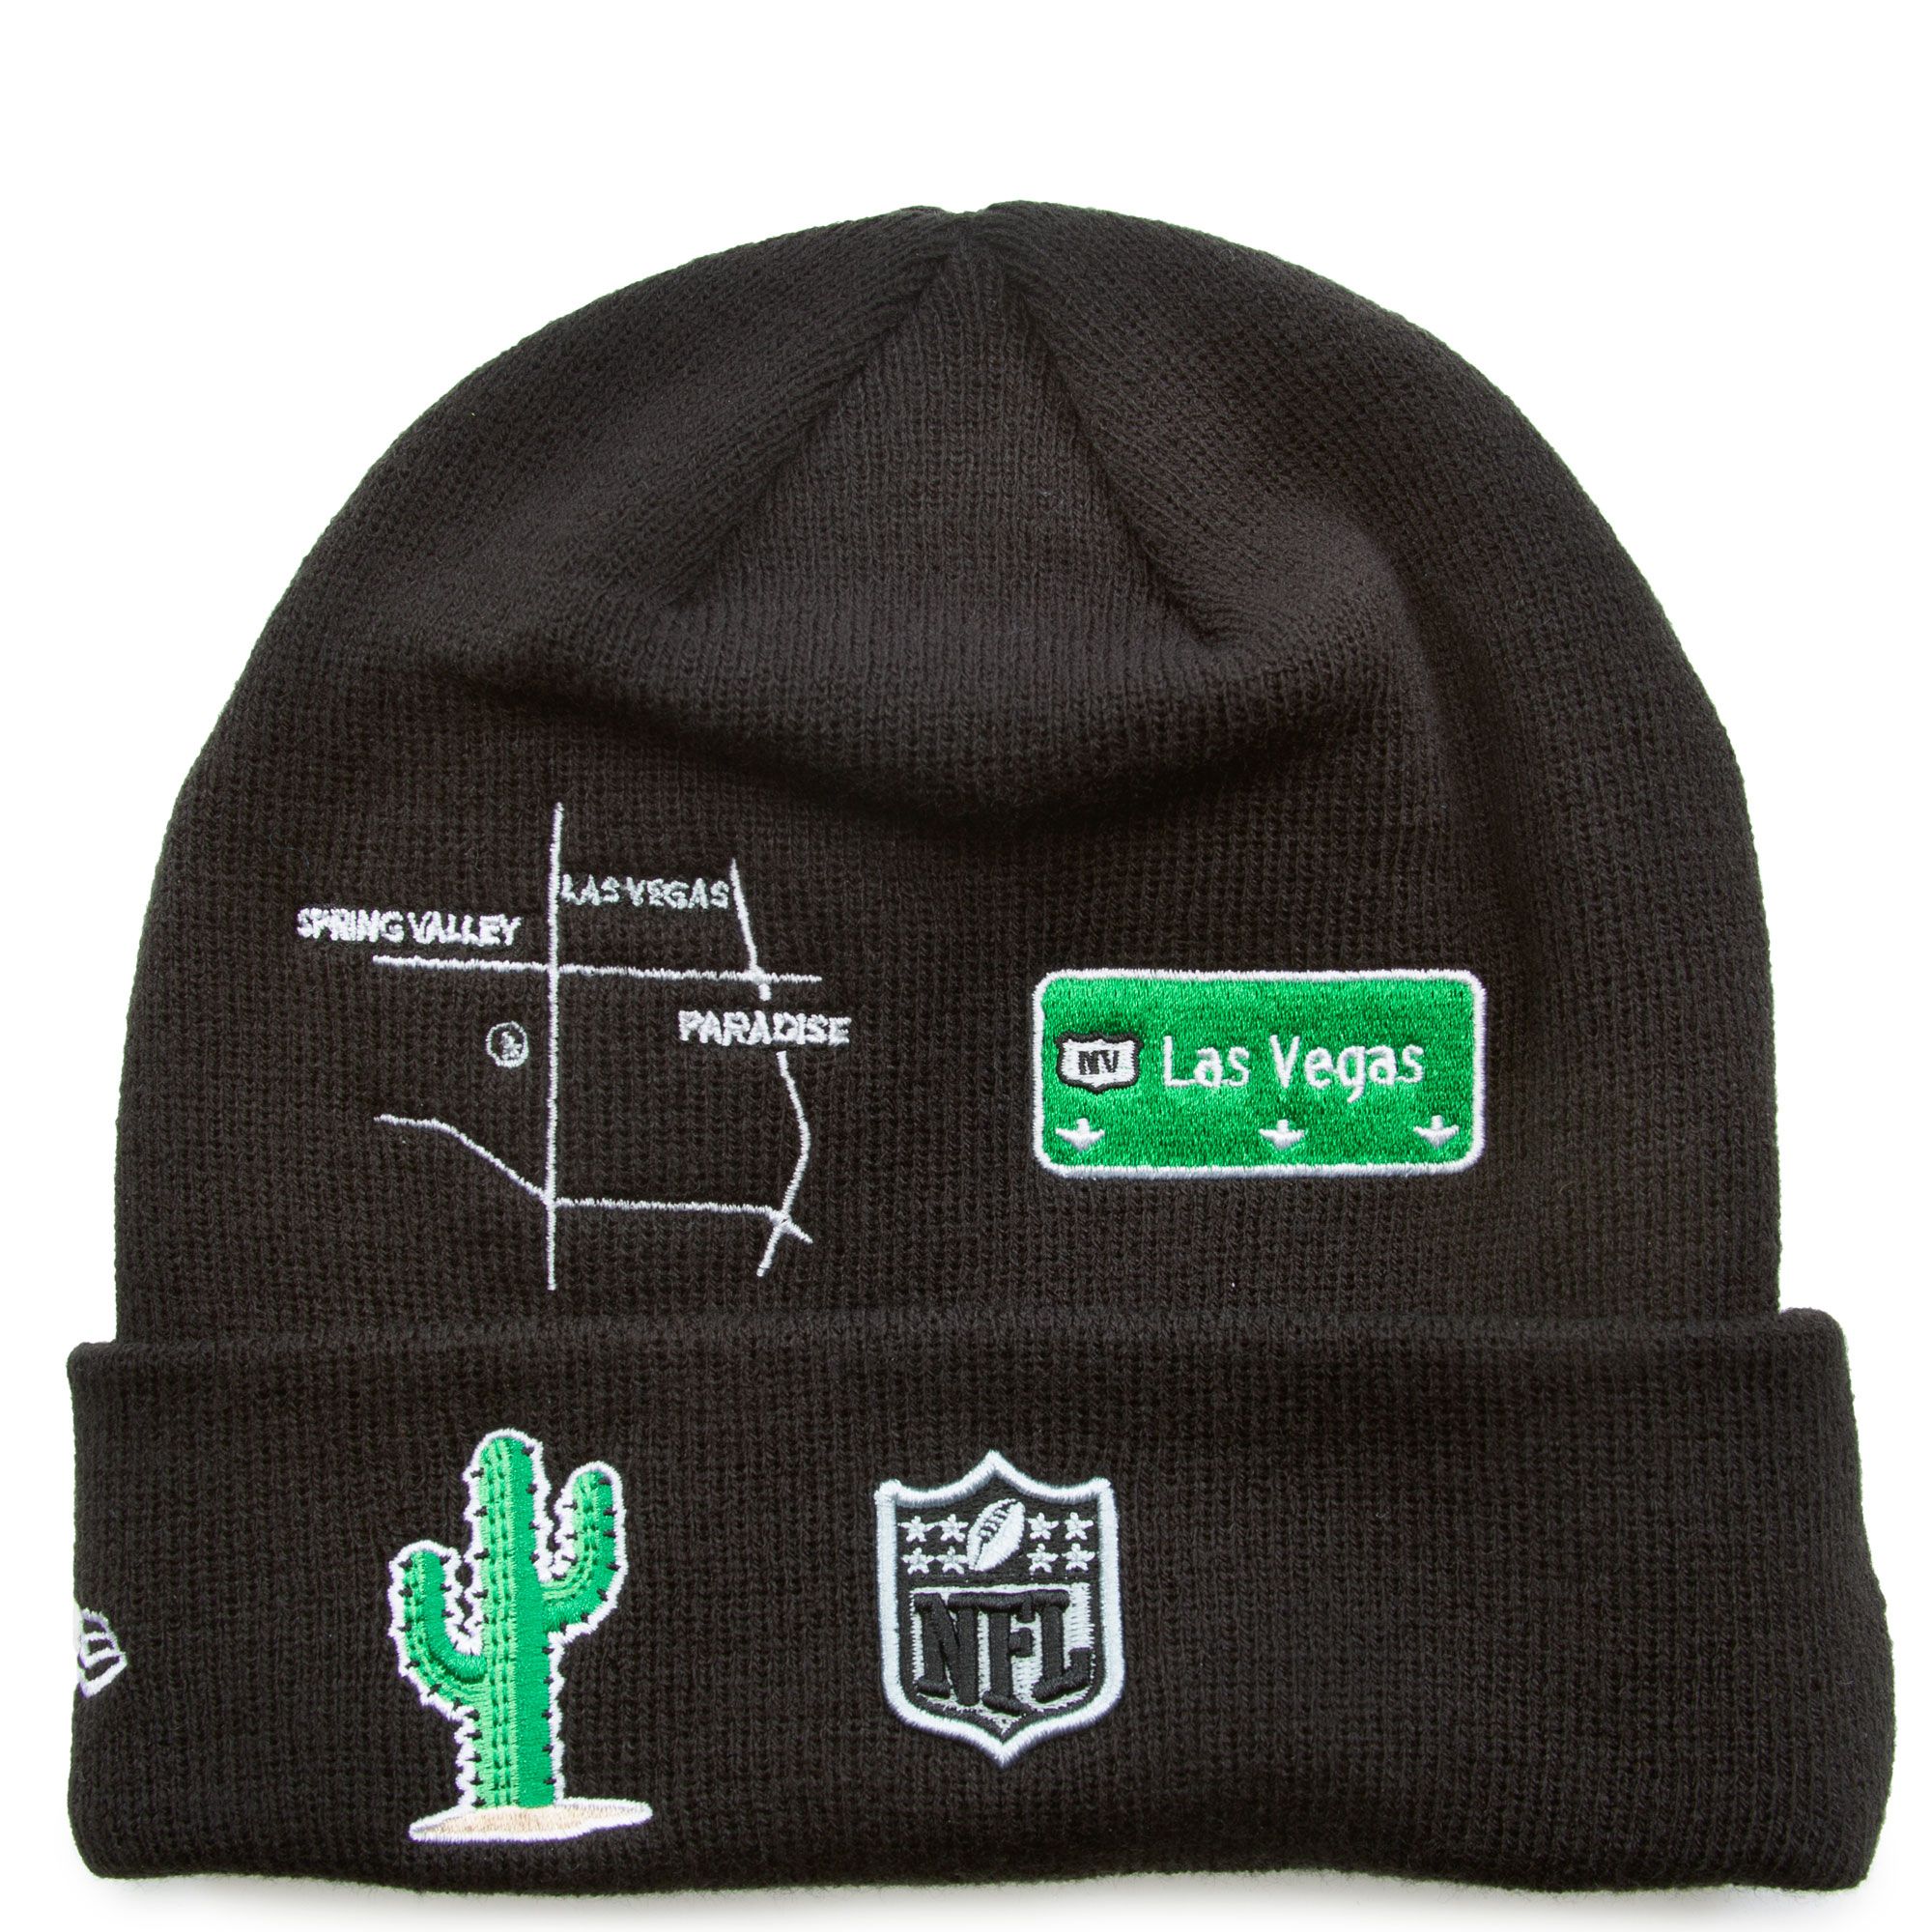 Las Vegas LV Embroidered Long Beanie, City/State Designed